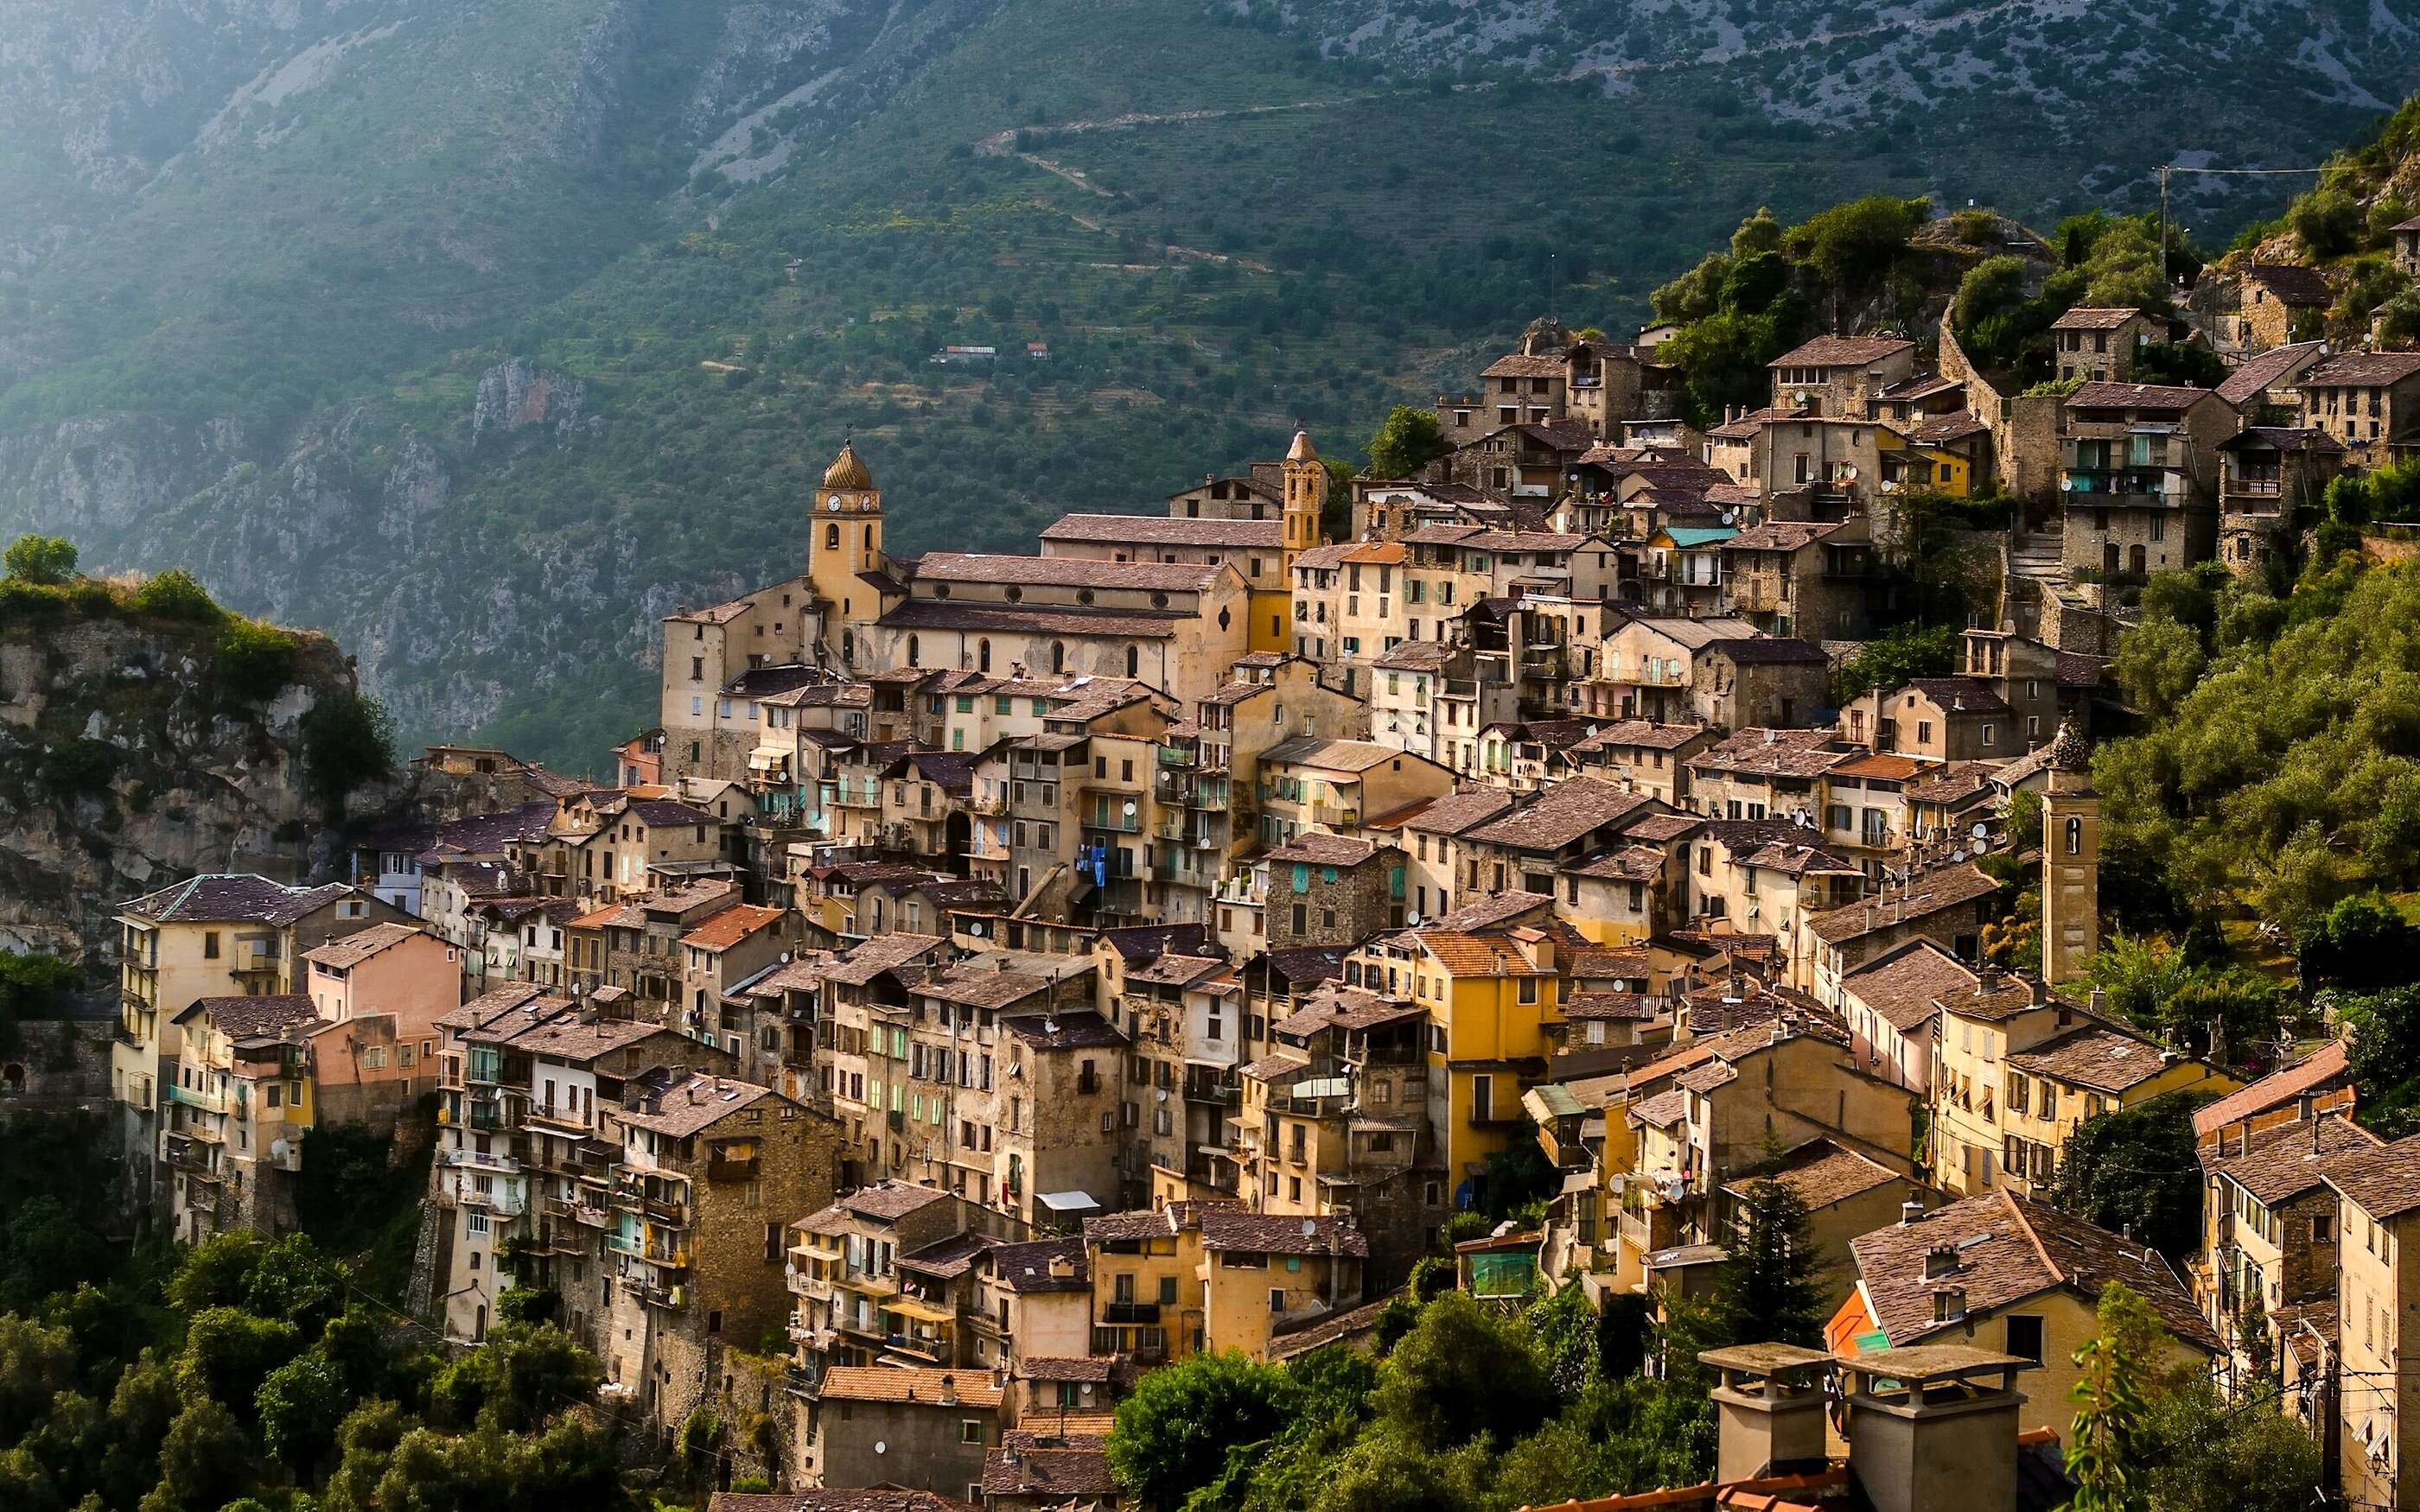 saorge, France, Saorzh, France, Mountain, Village, Buildings, Houses, Slope, Panoramic Wallpaper